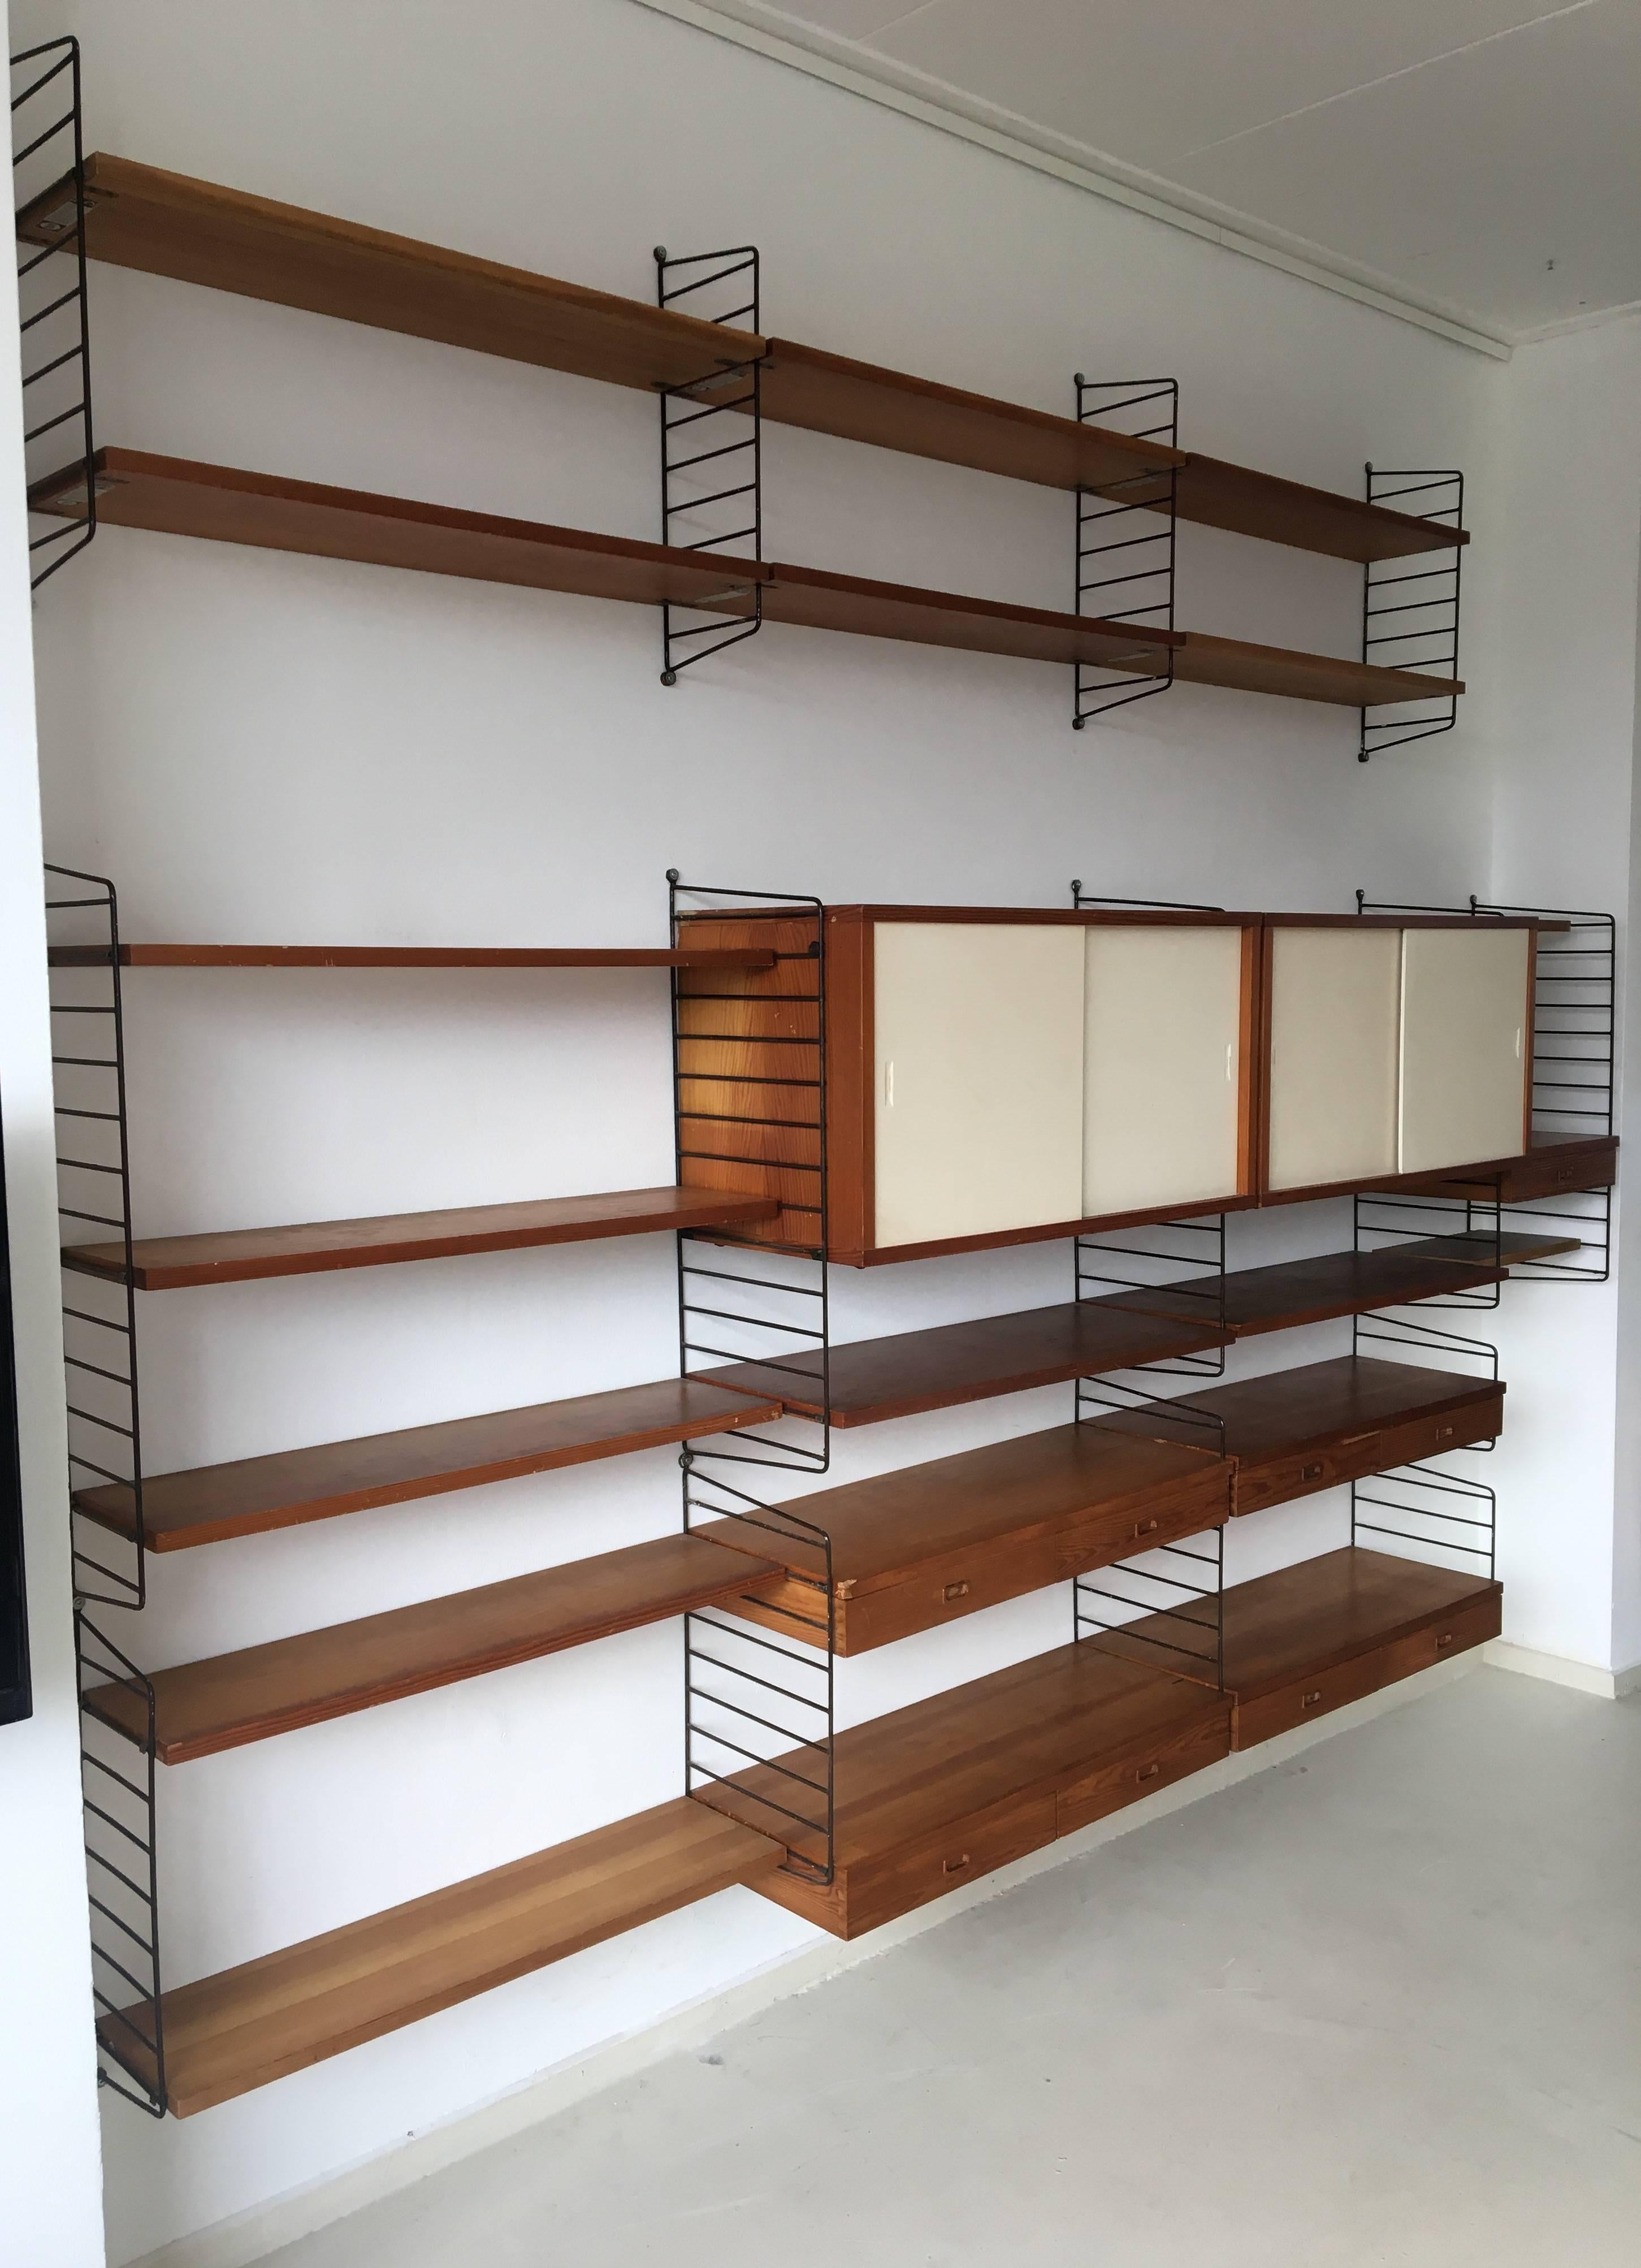 Mid-Century Modern Shelving System / Wall Unit by Nisse Strinning for String Design AB Sweden, 1960 For Sale